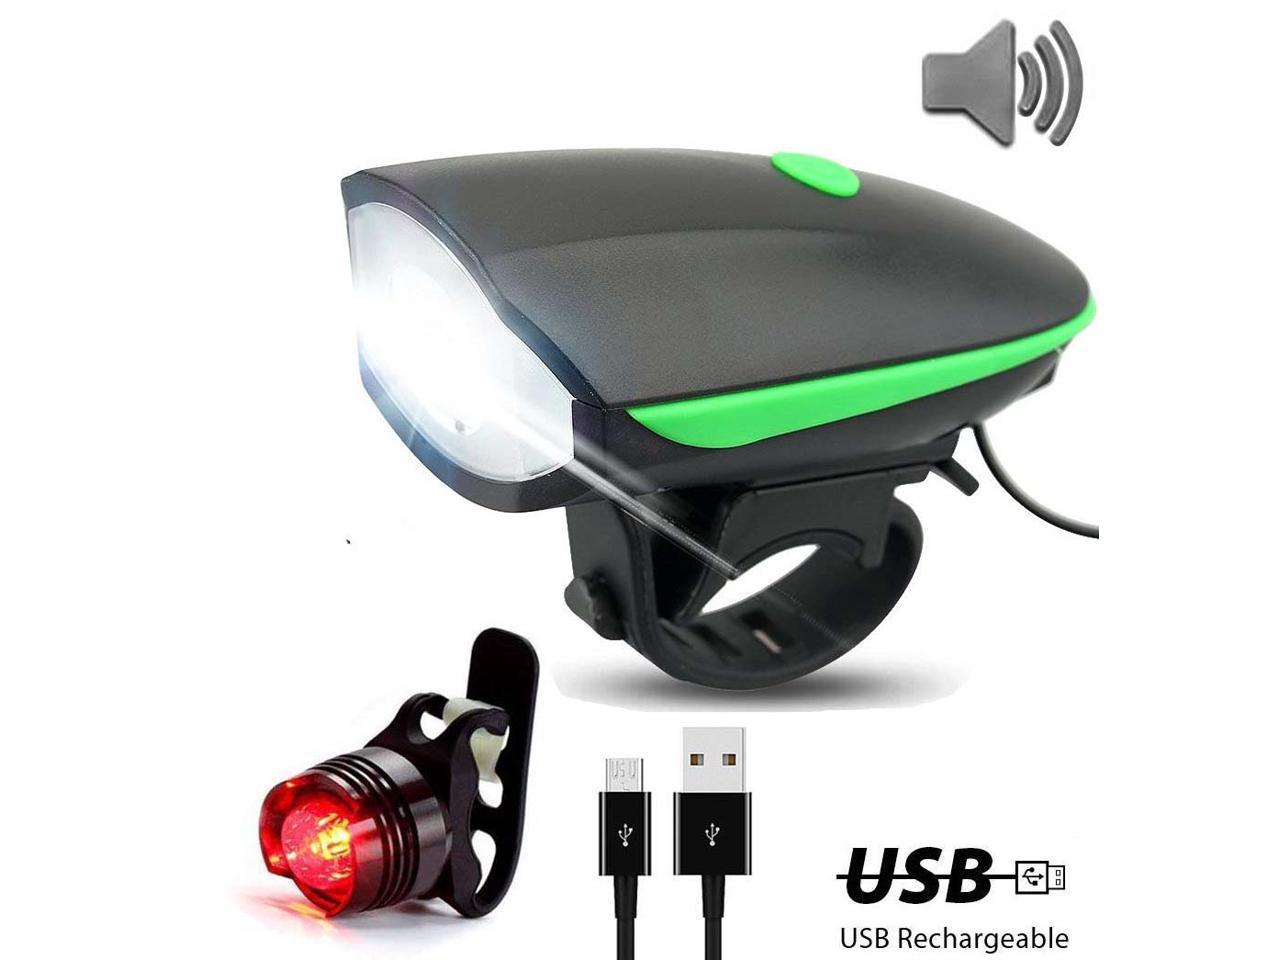 Details about   USB Rechargeable Bike Light Cycling Headlight Super Bright Bike Front Light For 